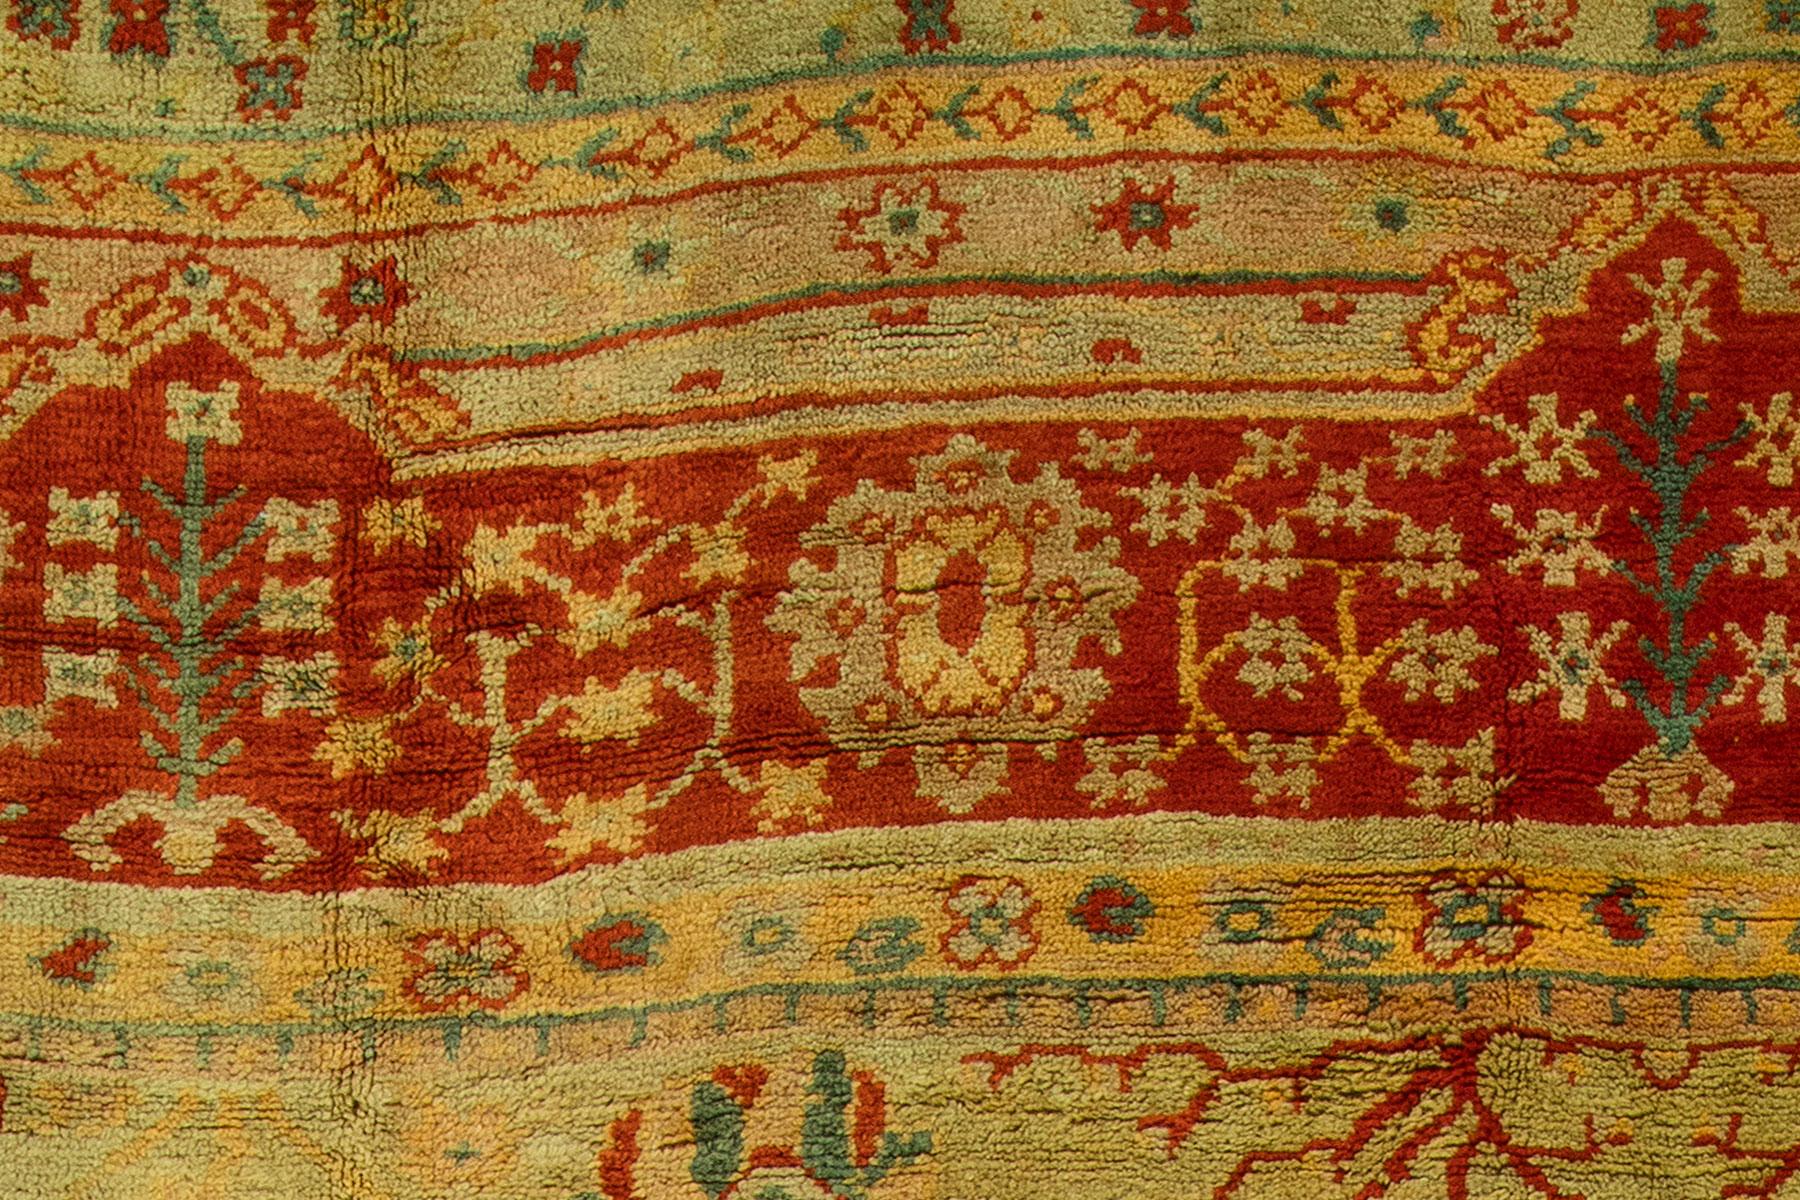 Antique Turkish Oushak Rug In Excellent Condition For Sale In New York, NY